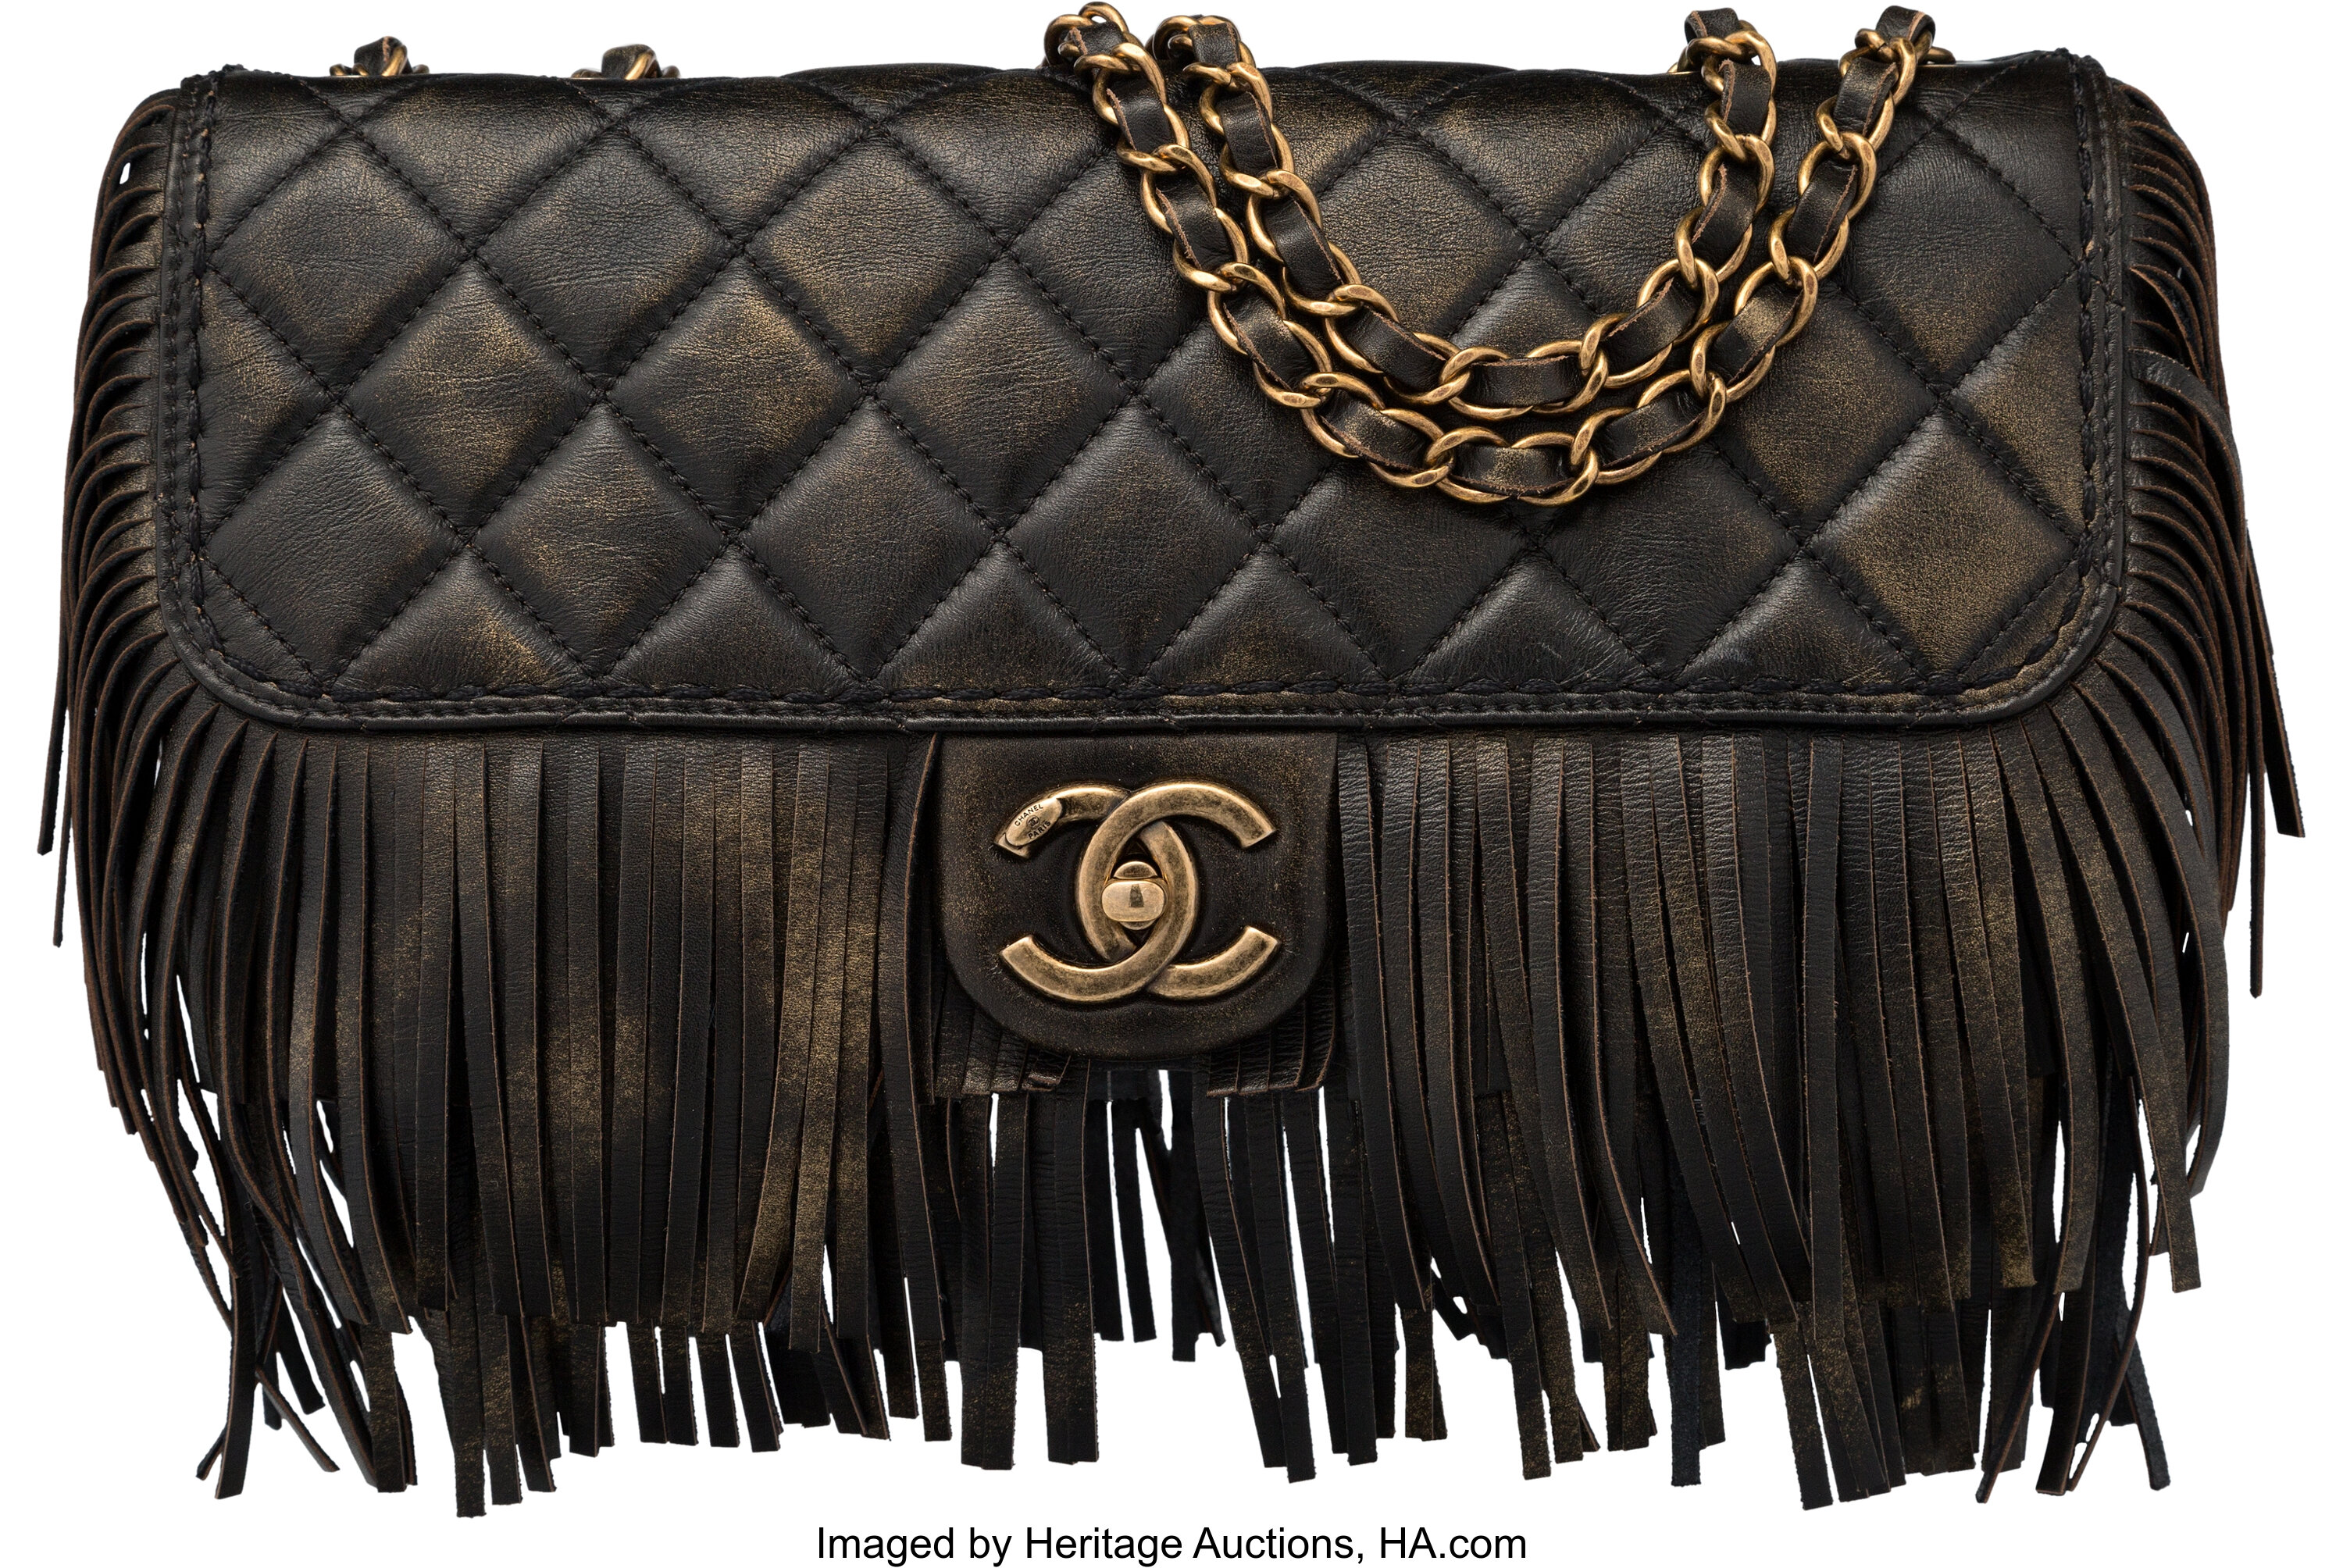 Chanel Black Quilted Leather and Calfhair Fringe Paris Dallas Bag